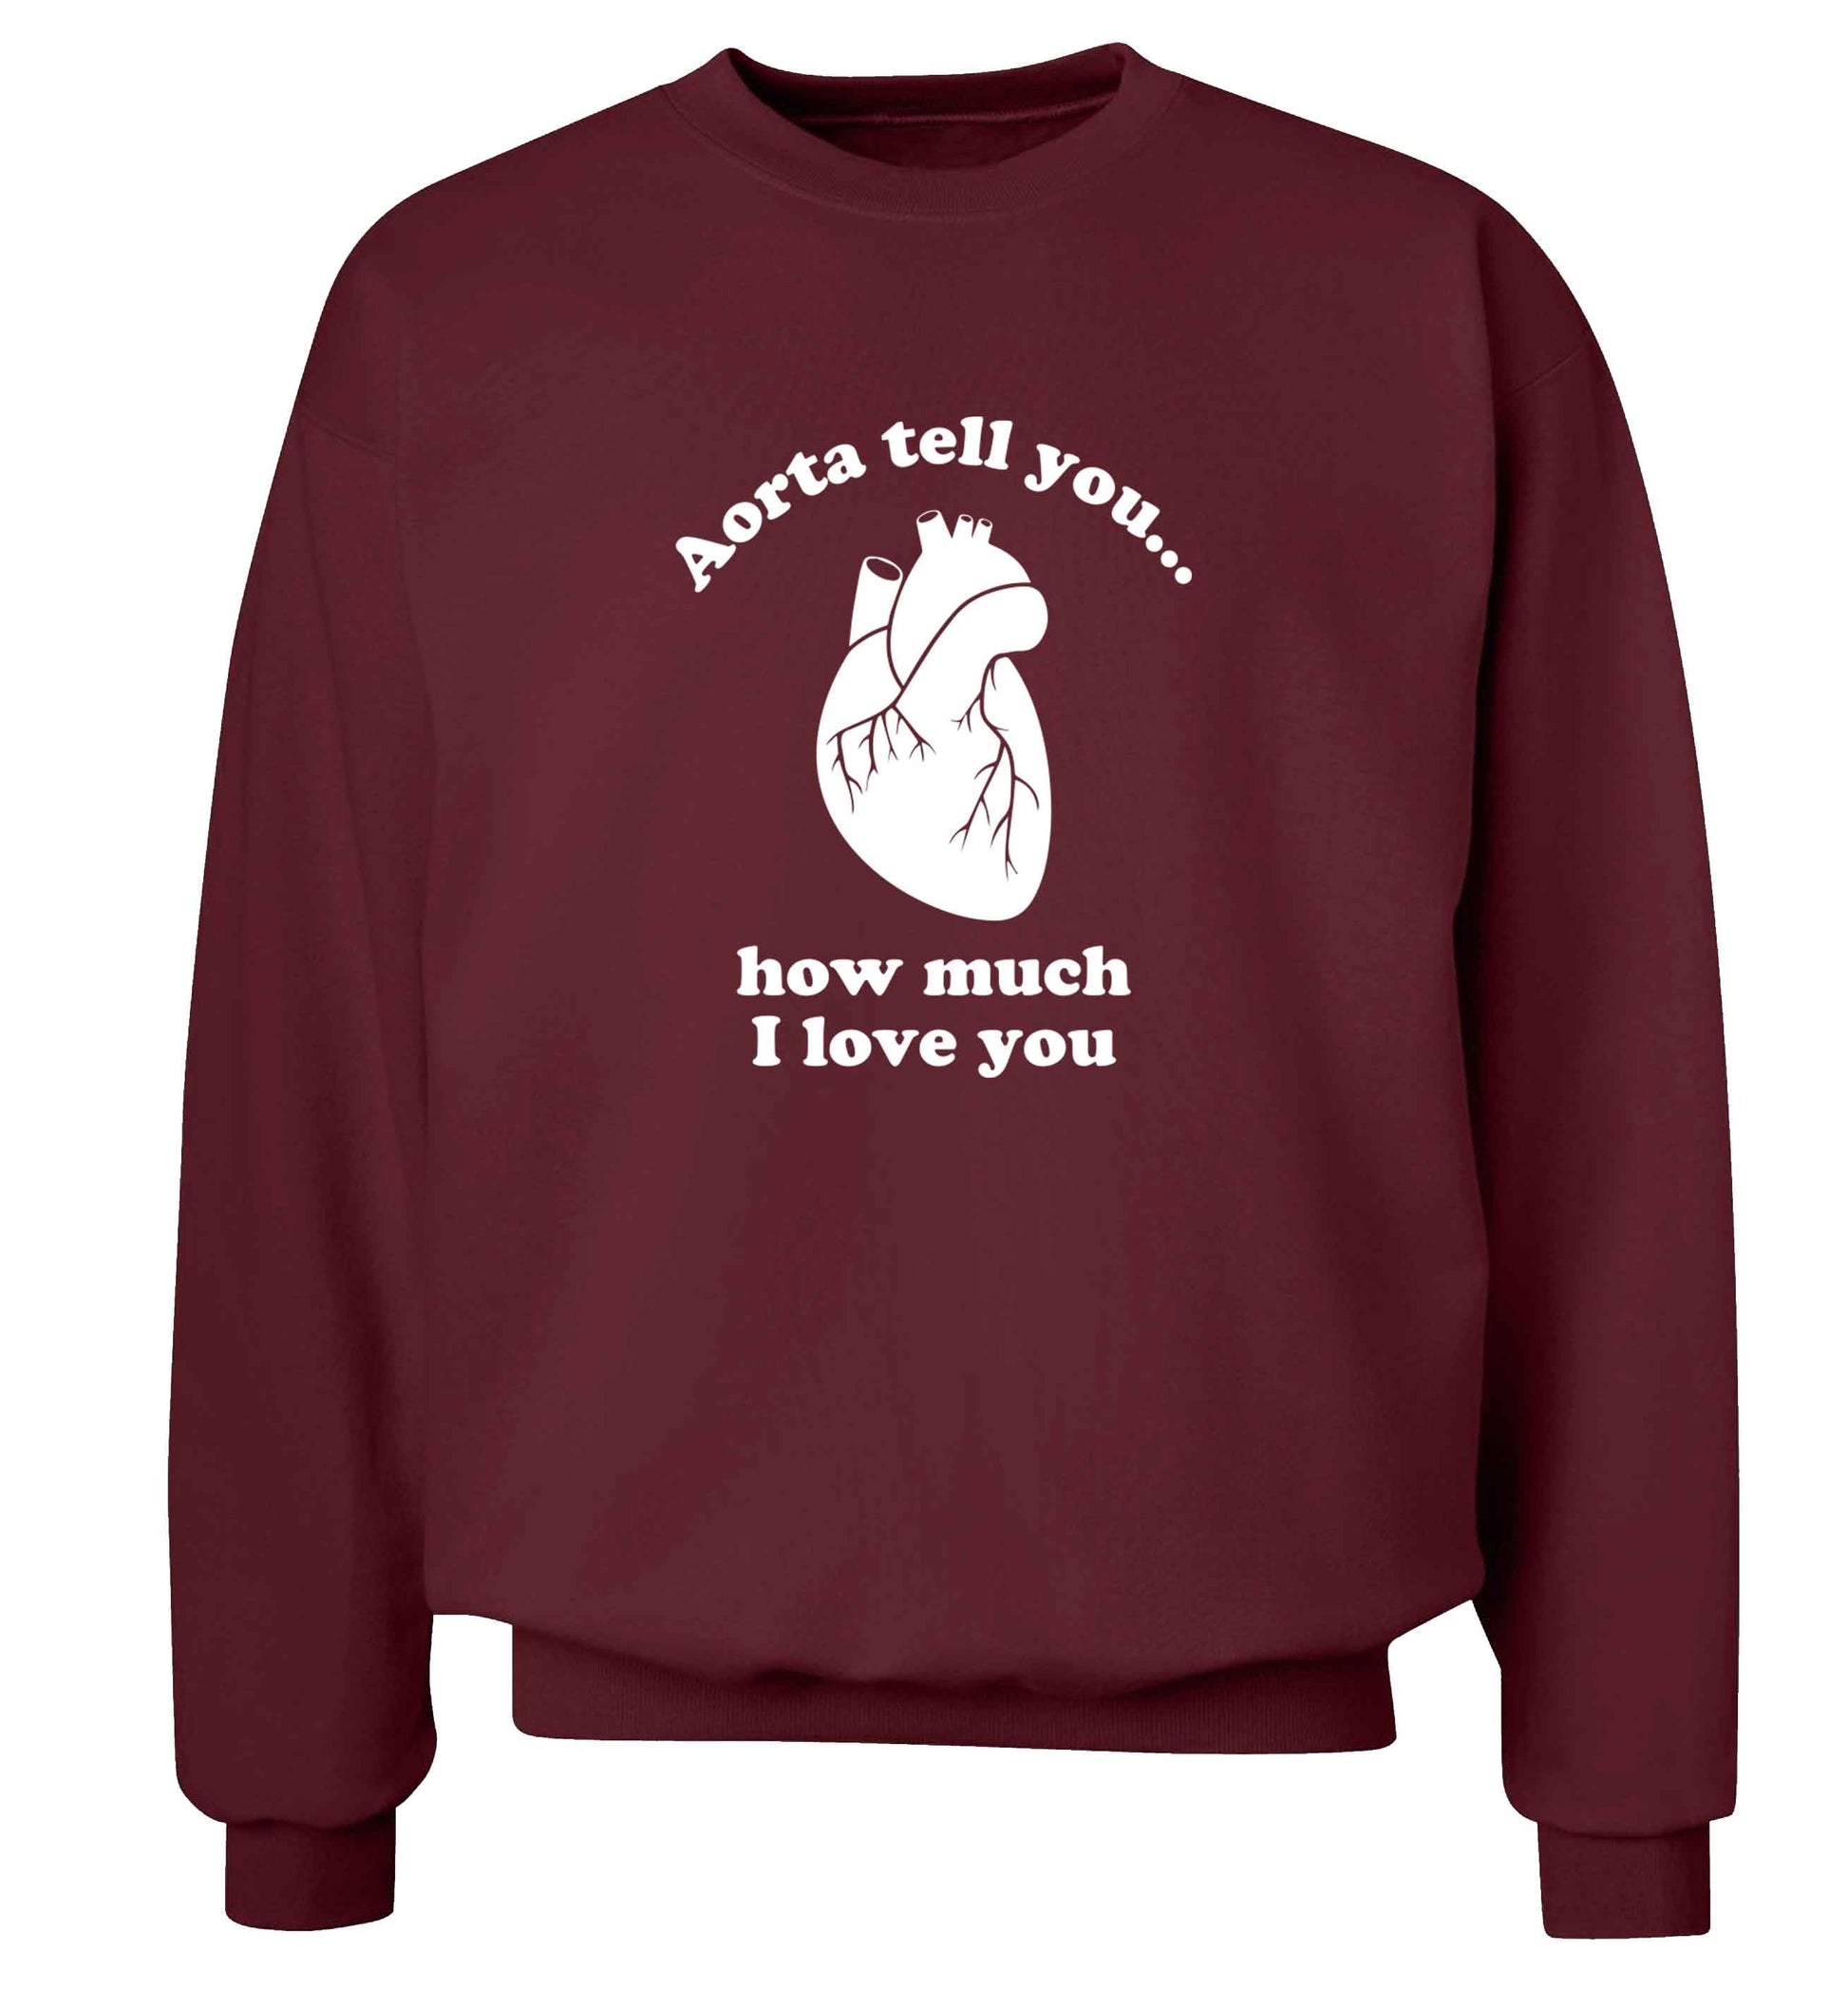 Aorta tell you how much I love you adult's unisex maroon sweater 2XL